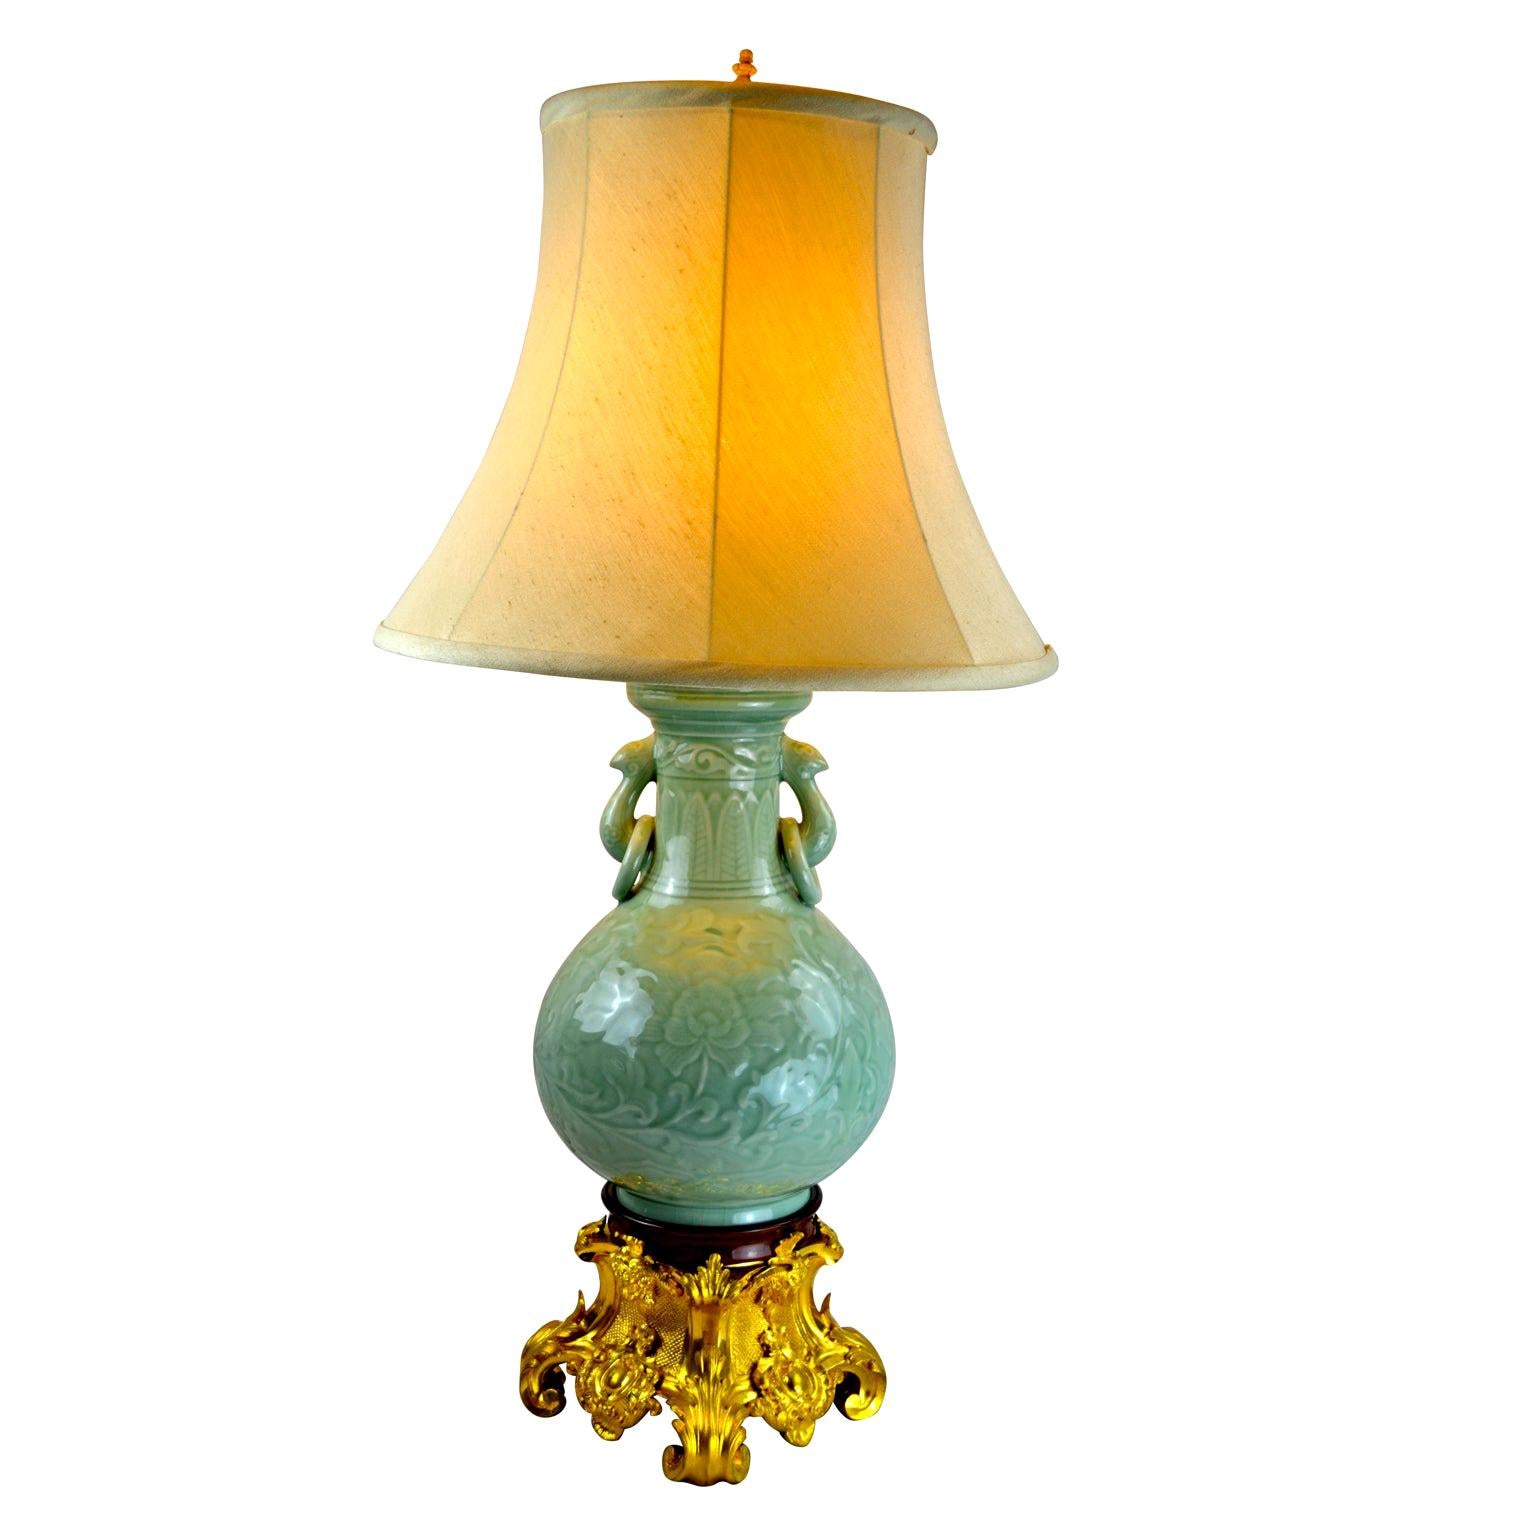 Chinese Celadon Vase Lamp with a French 19 Century Gilt Bronze Base